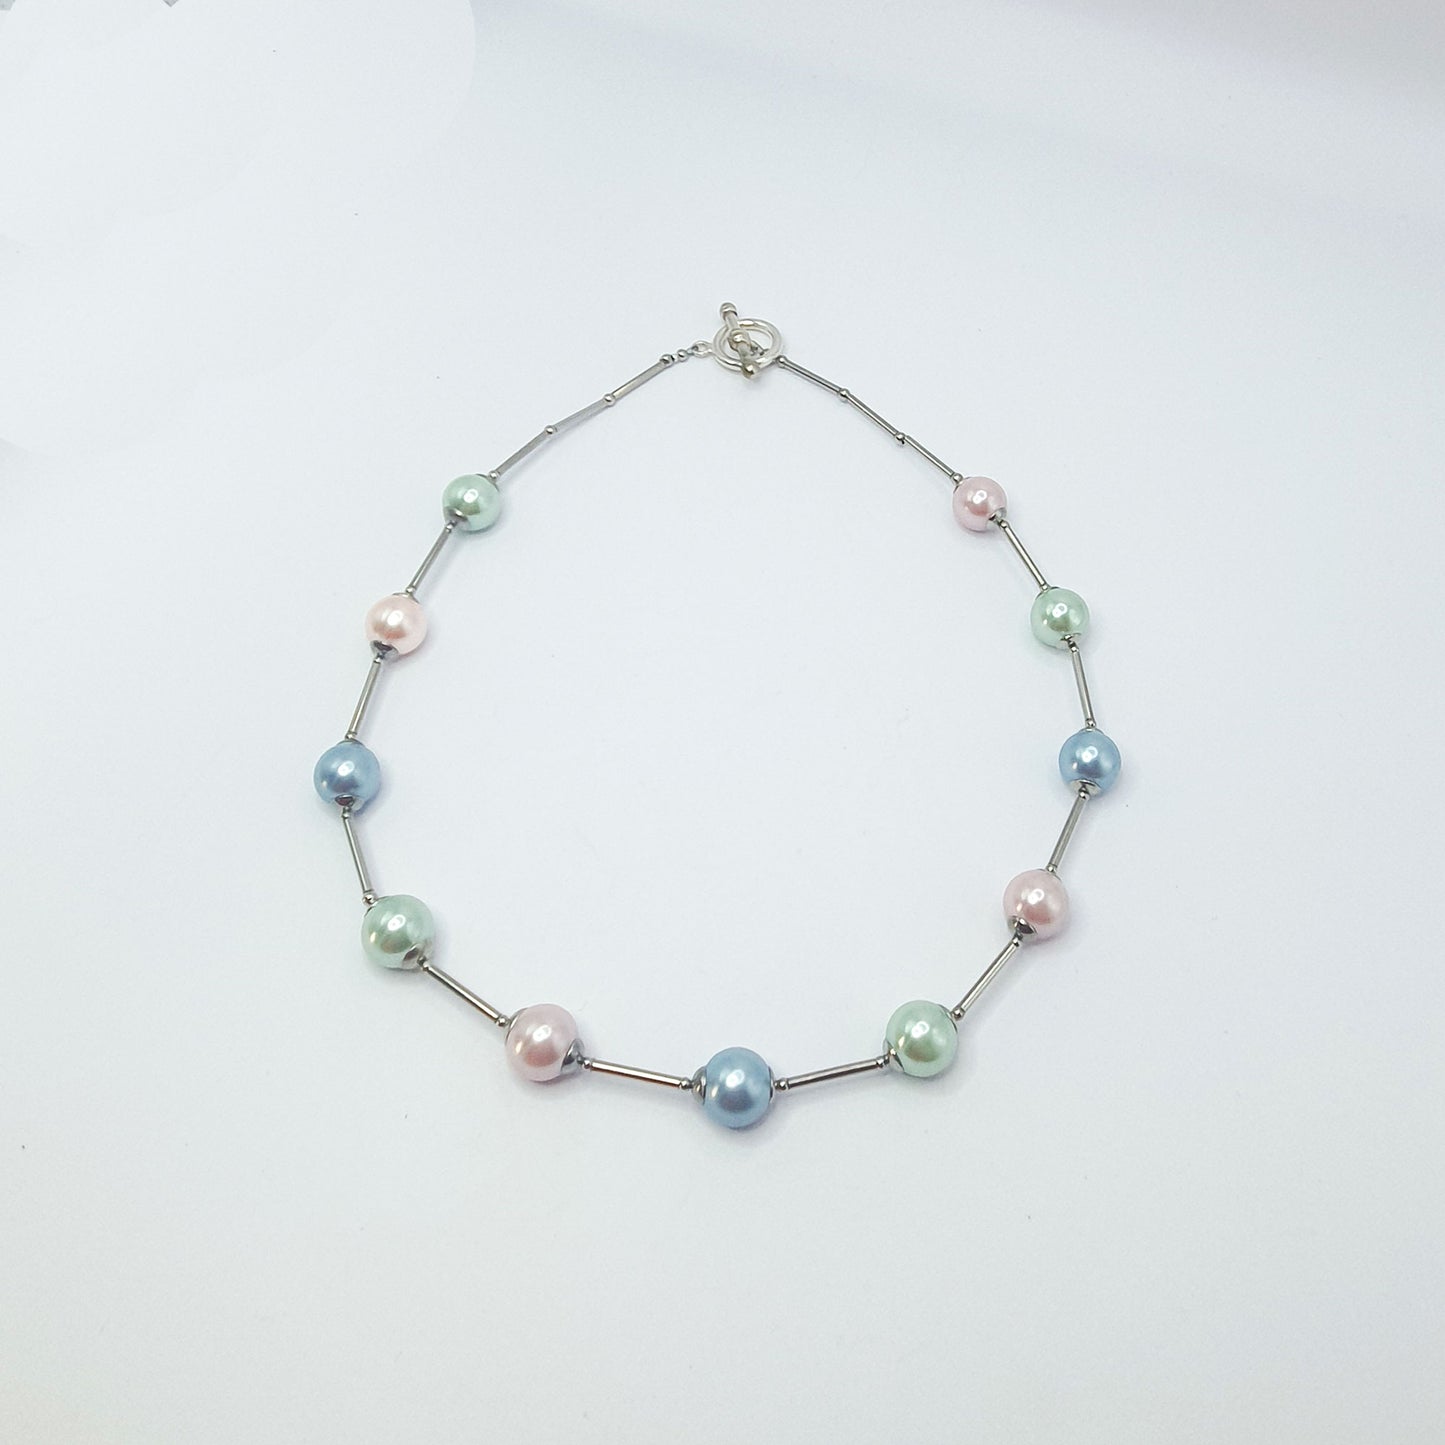 Glass pearl orb-style necklace in pastel shades of blue,  pink and green